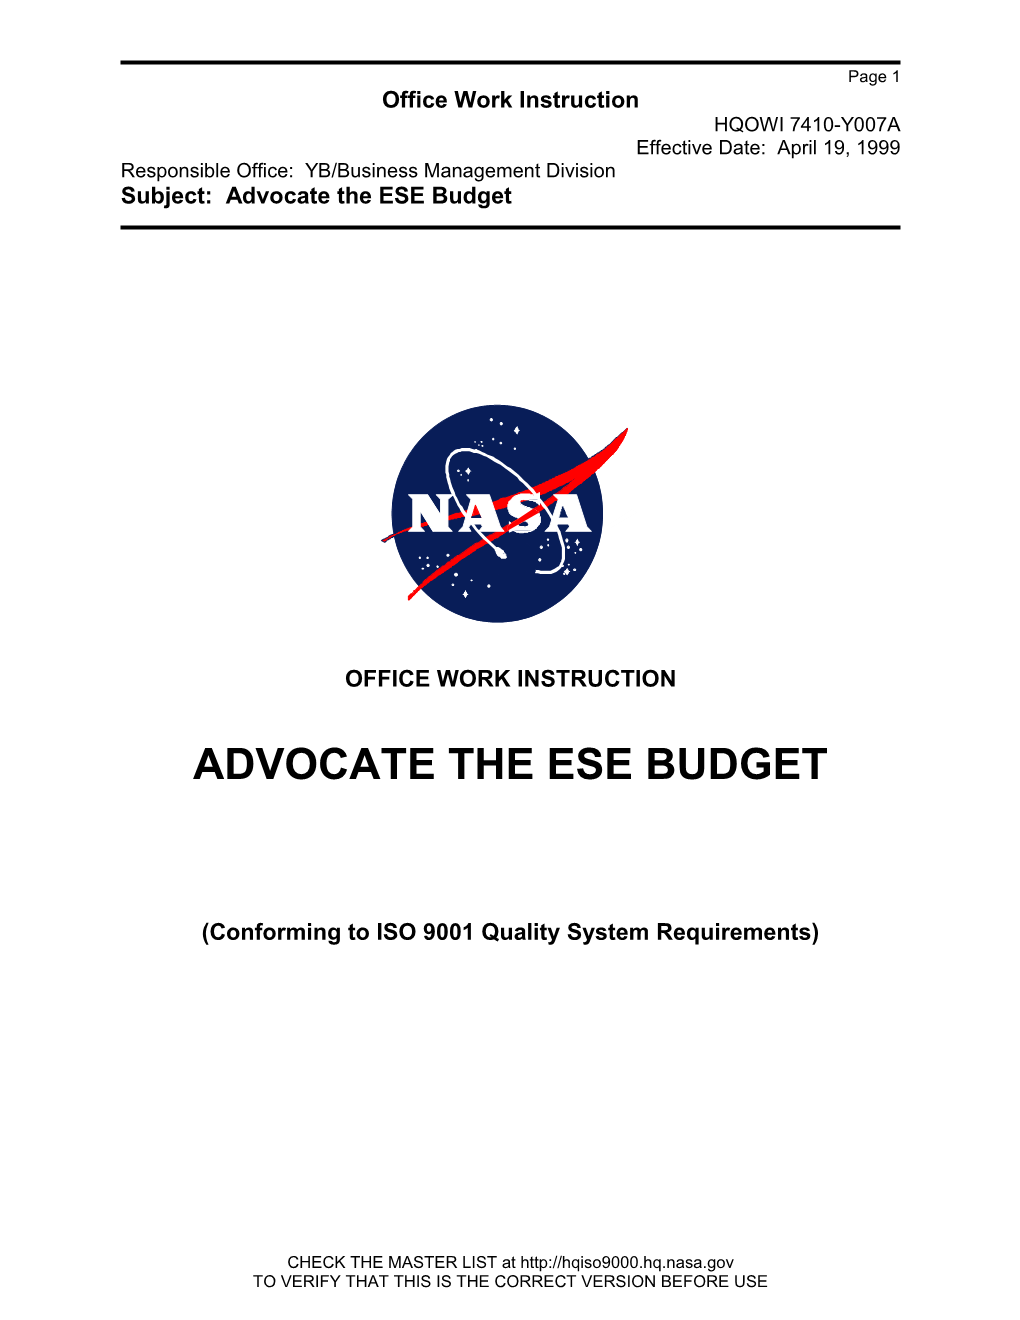 Advocate the ESE Budget